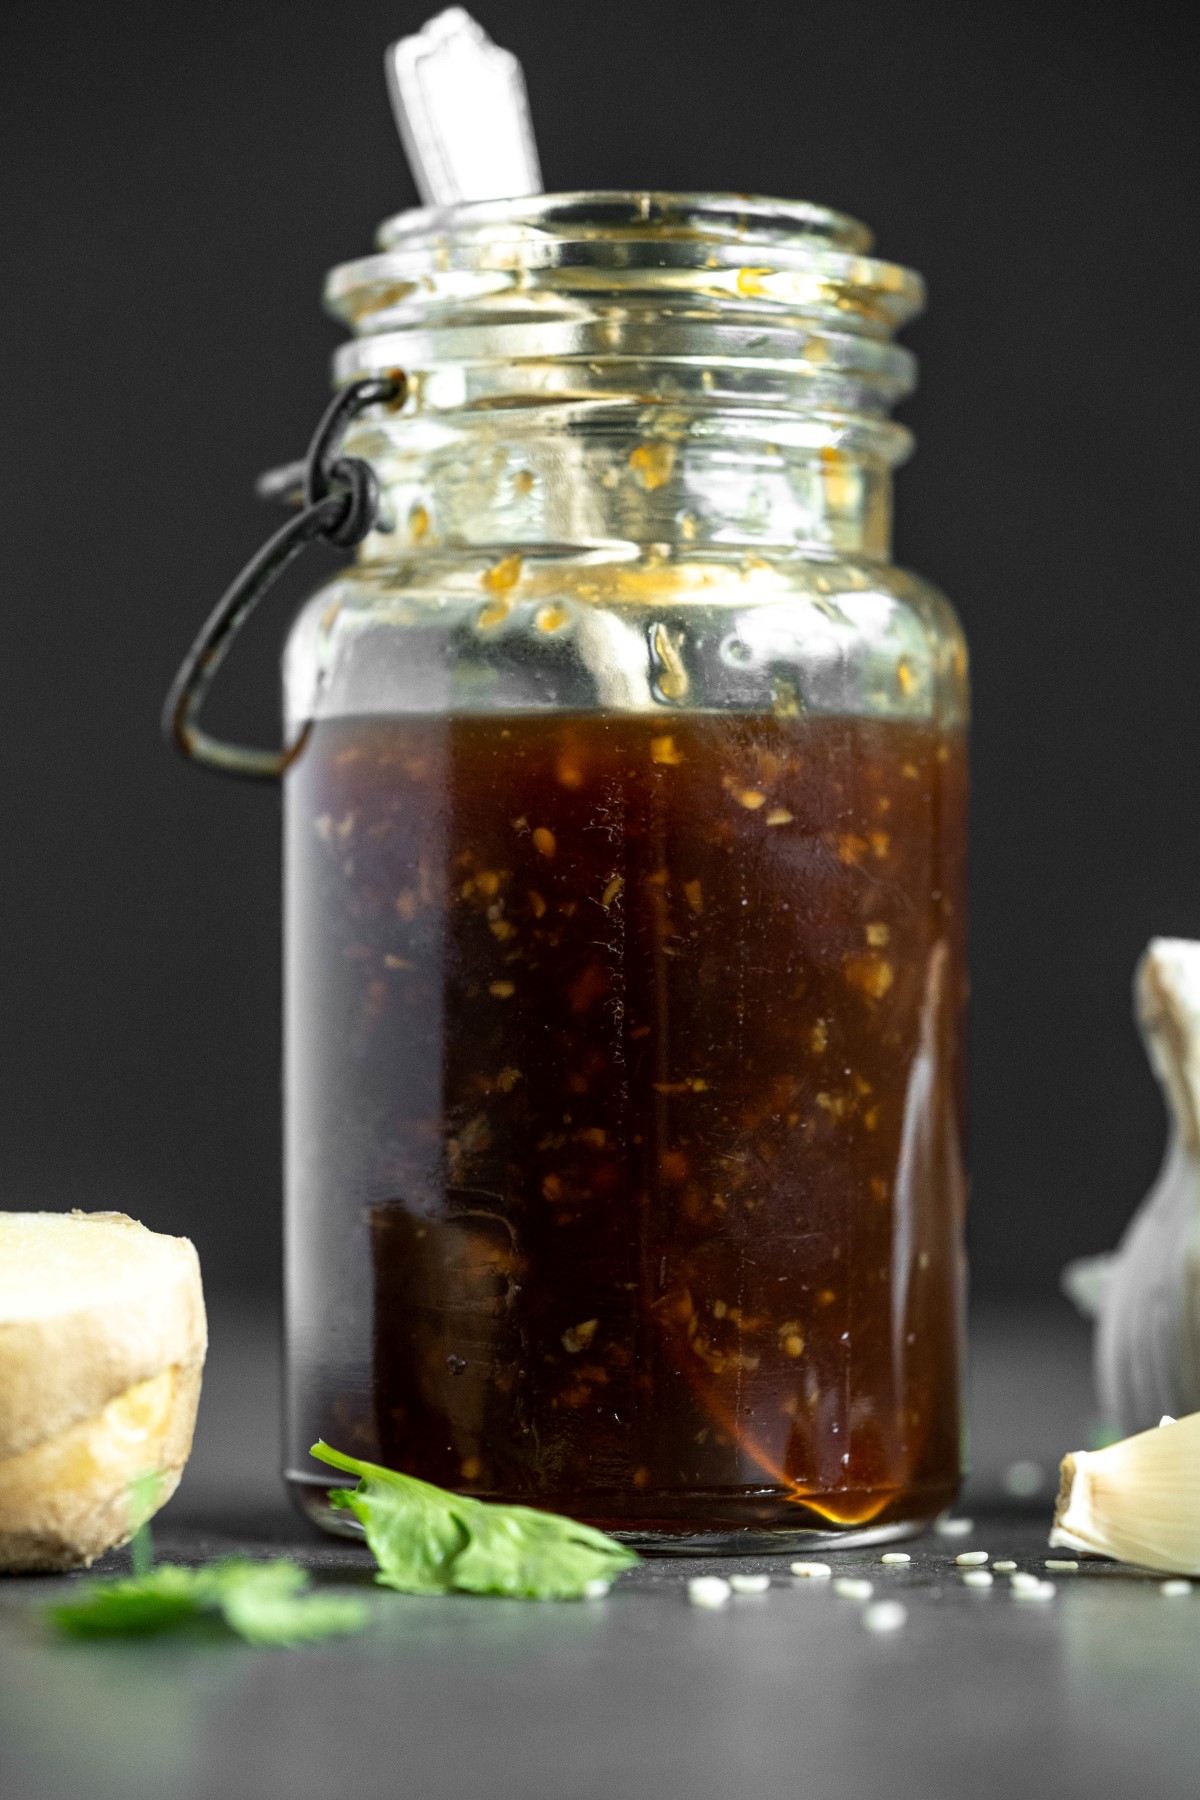 Teriyaki sauce in a clear glass jar with sesame seeds, a piece of ginger and clove of garlic beside the jar.